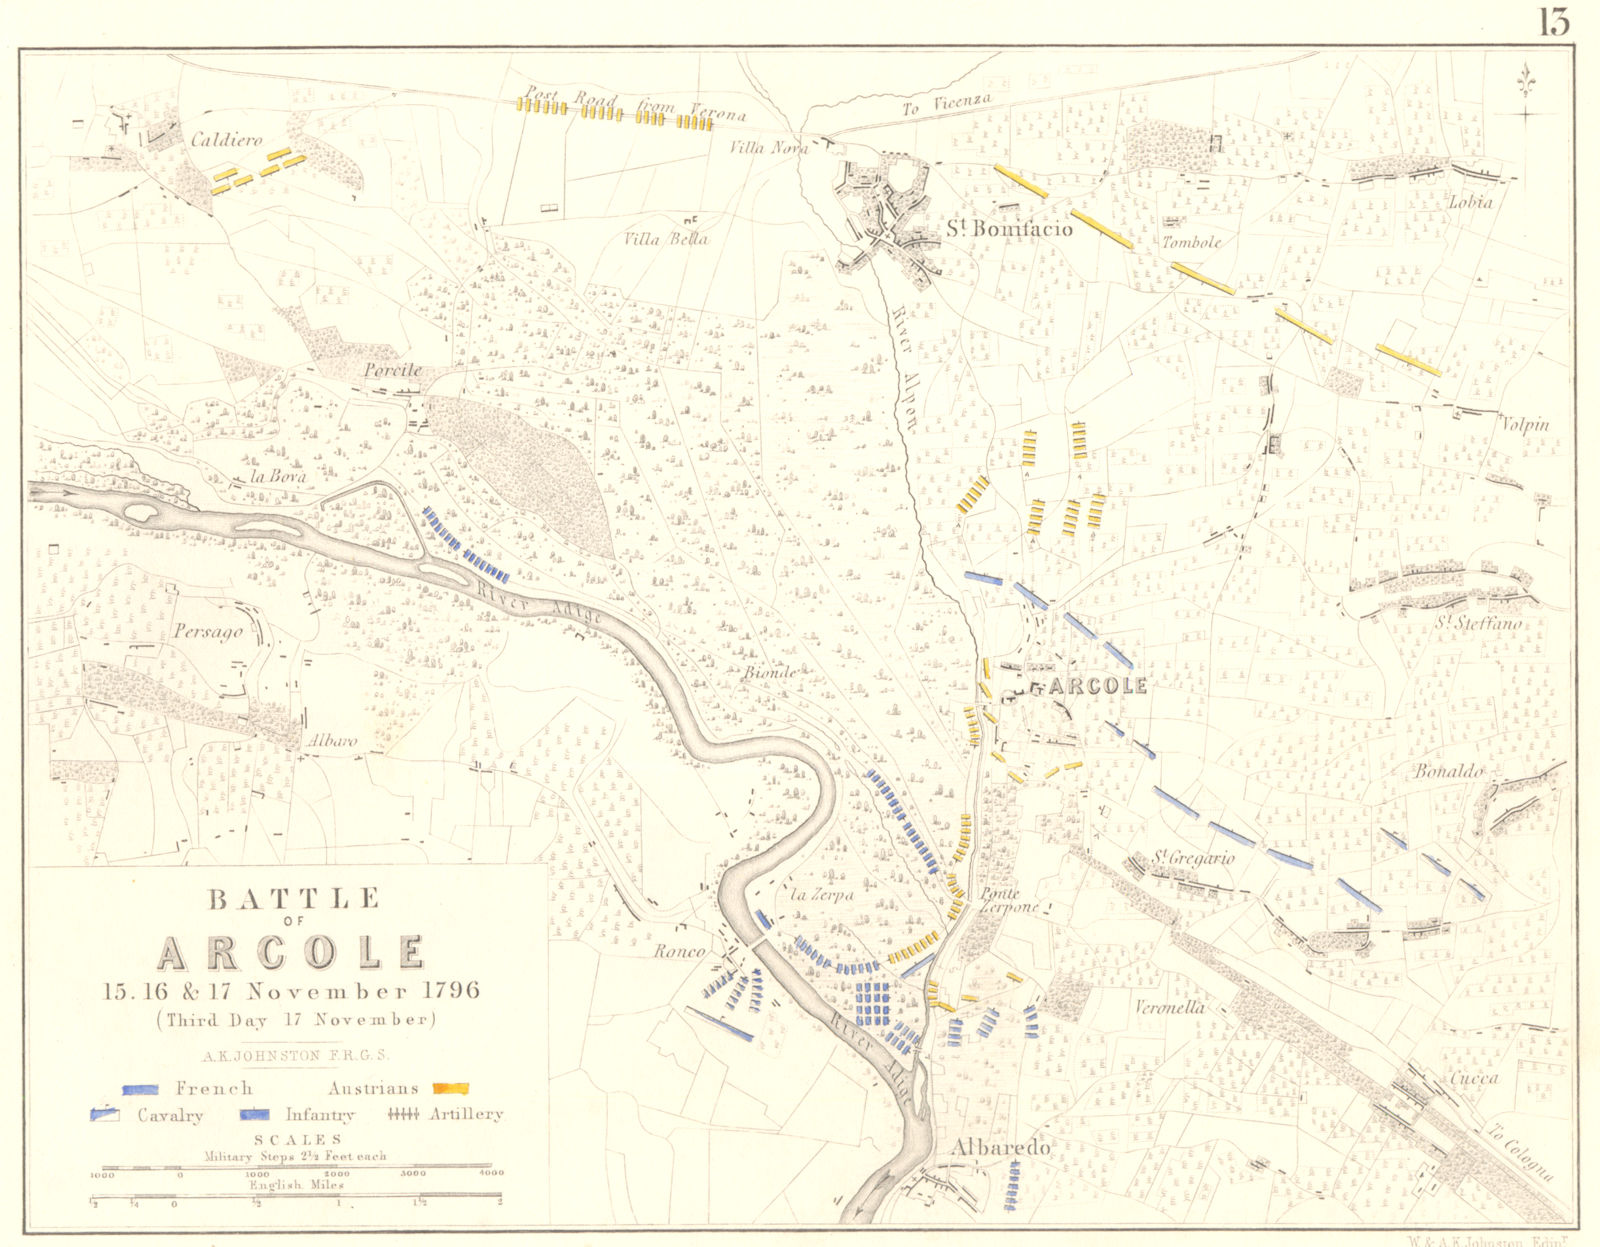 Associate Product BATTLE OF ARCOLE 15TH. 16th, and 17th November 1796 - sheet 2. Italy 1848 map